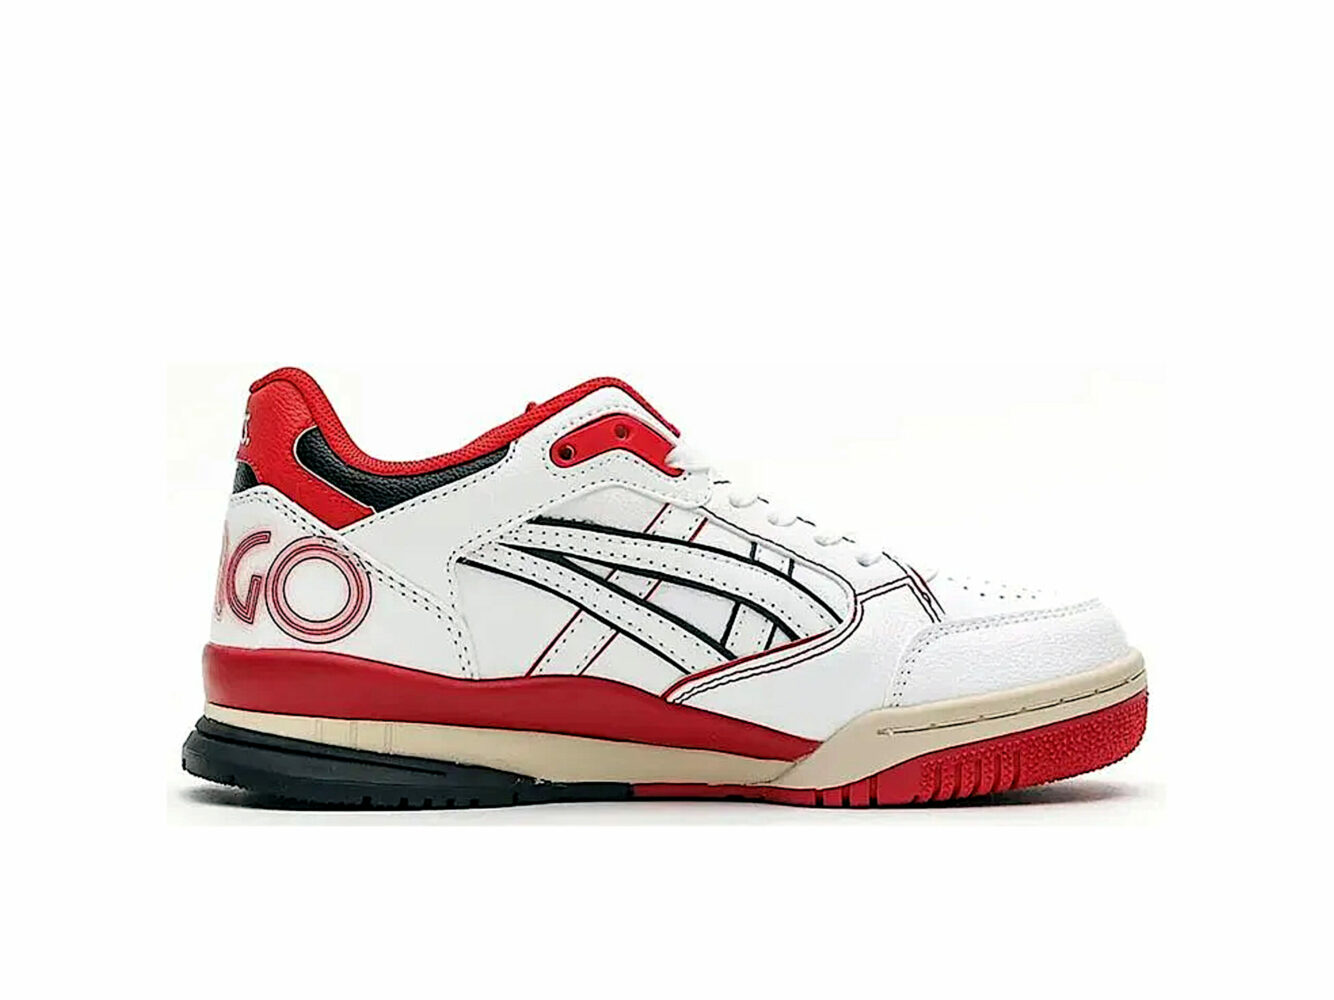 asics city poster chicago sportlyte low white red 1203A233-020 купить